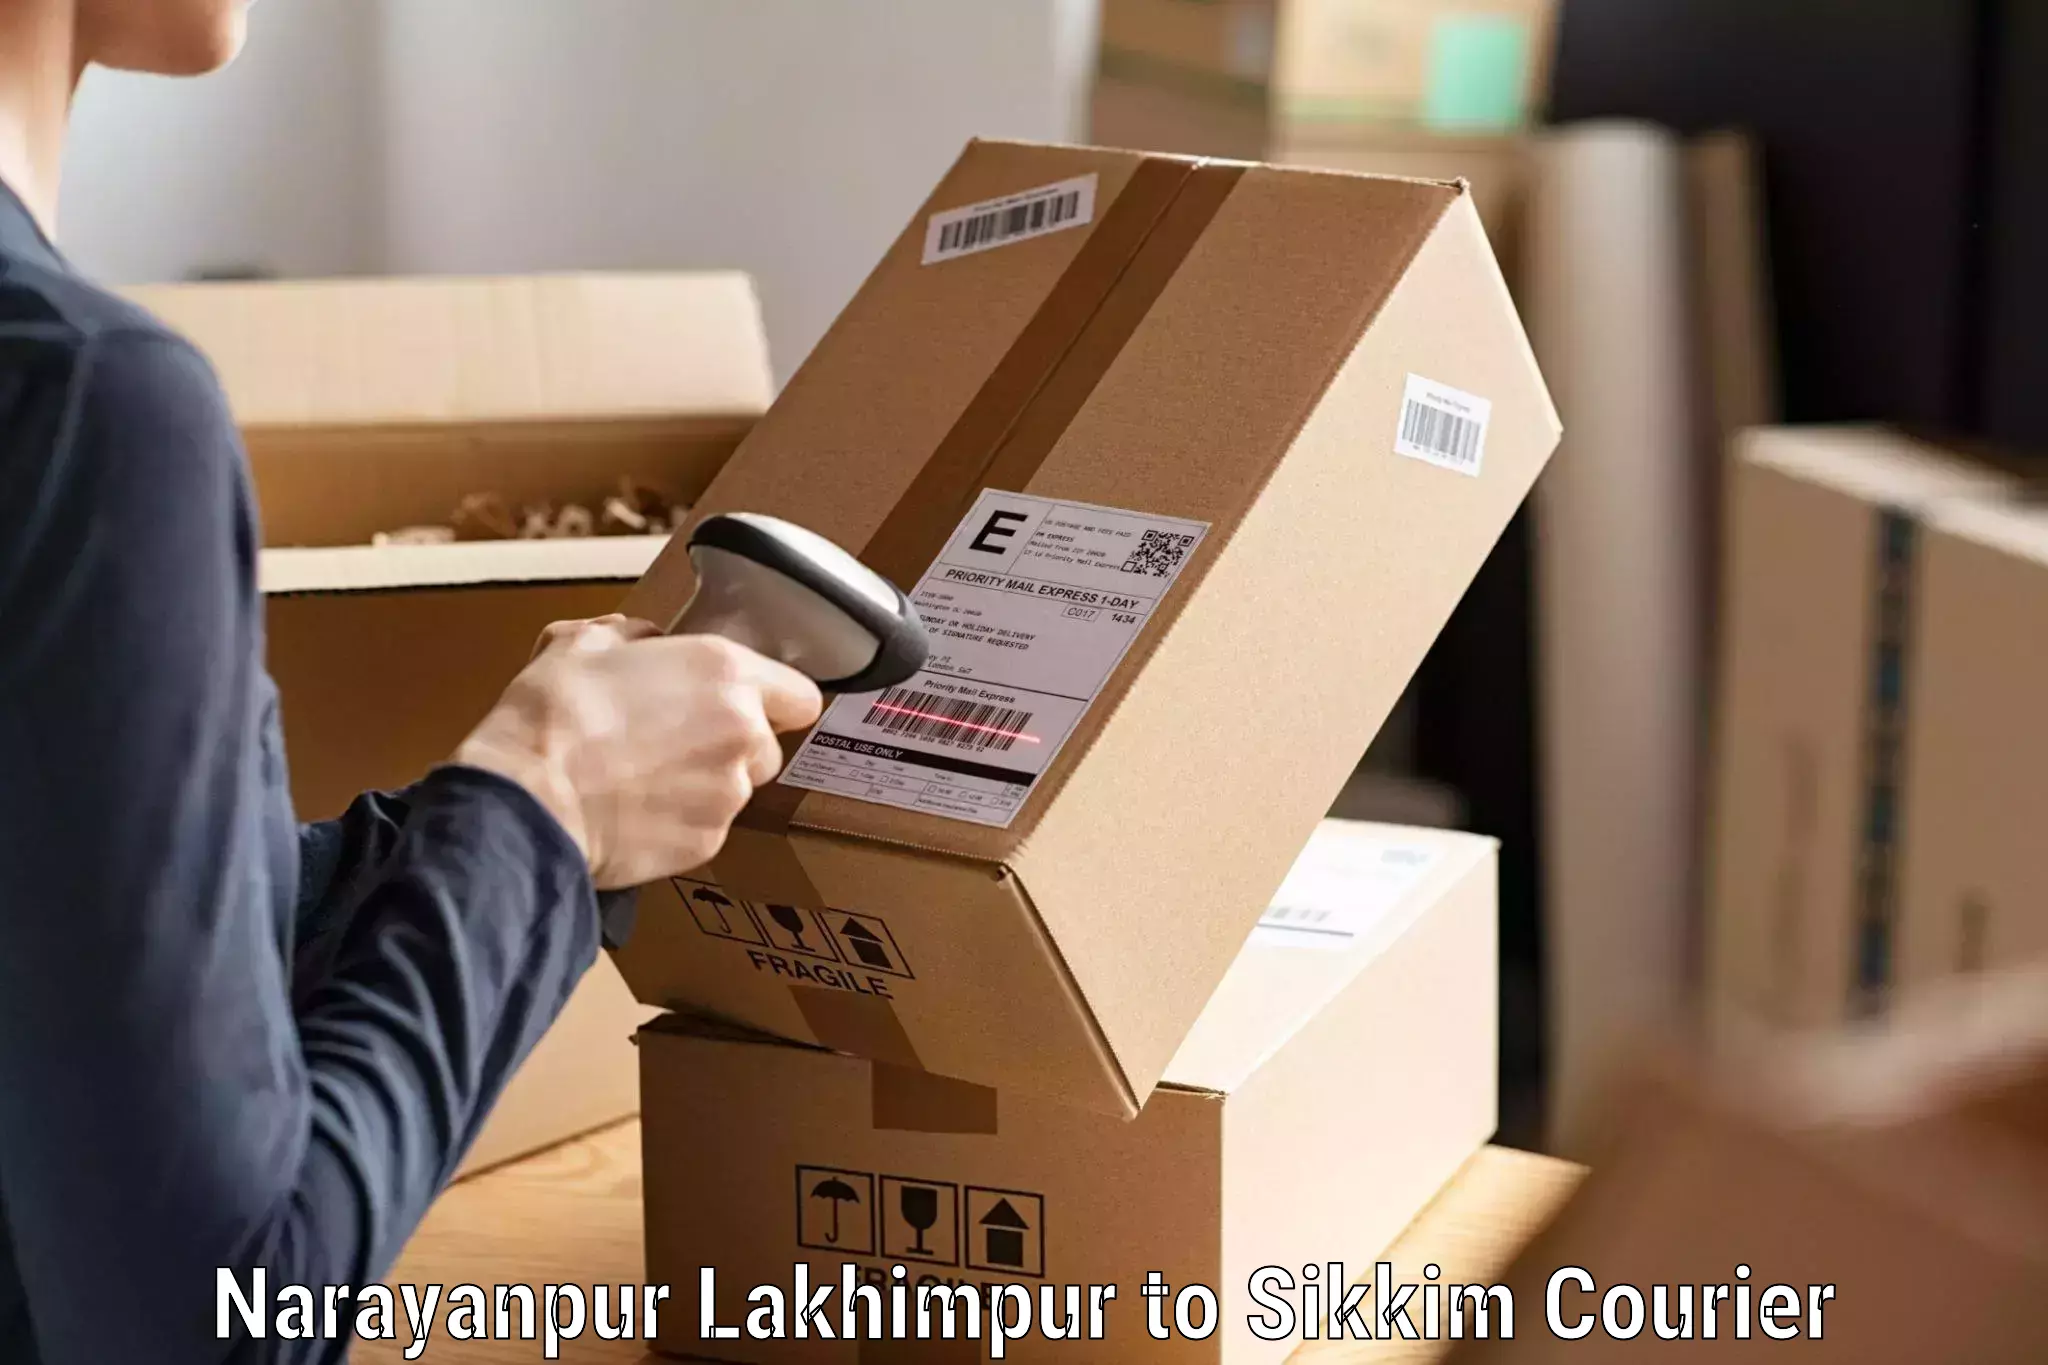 Supply chain delivery Narayanpur Lakhimpur to Jorethang